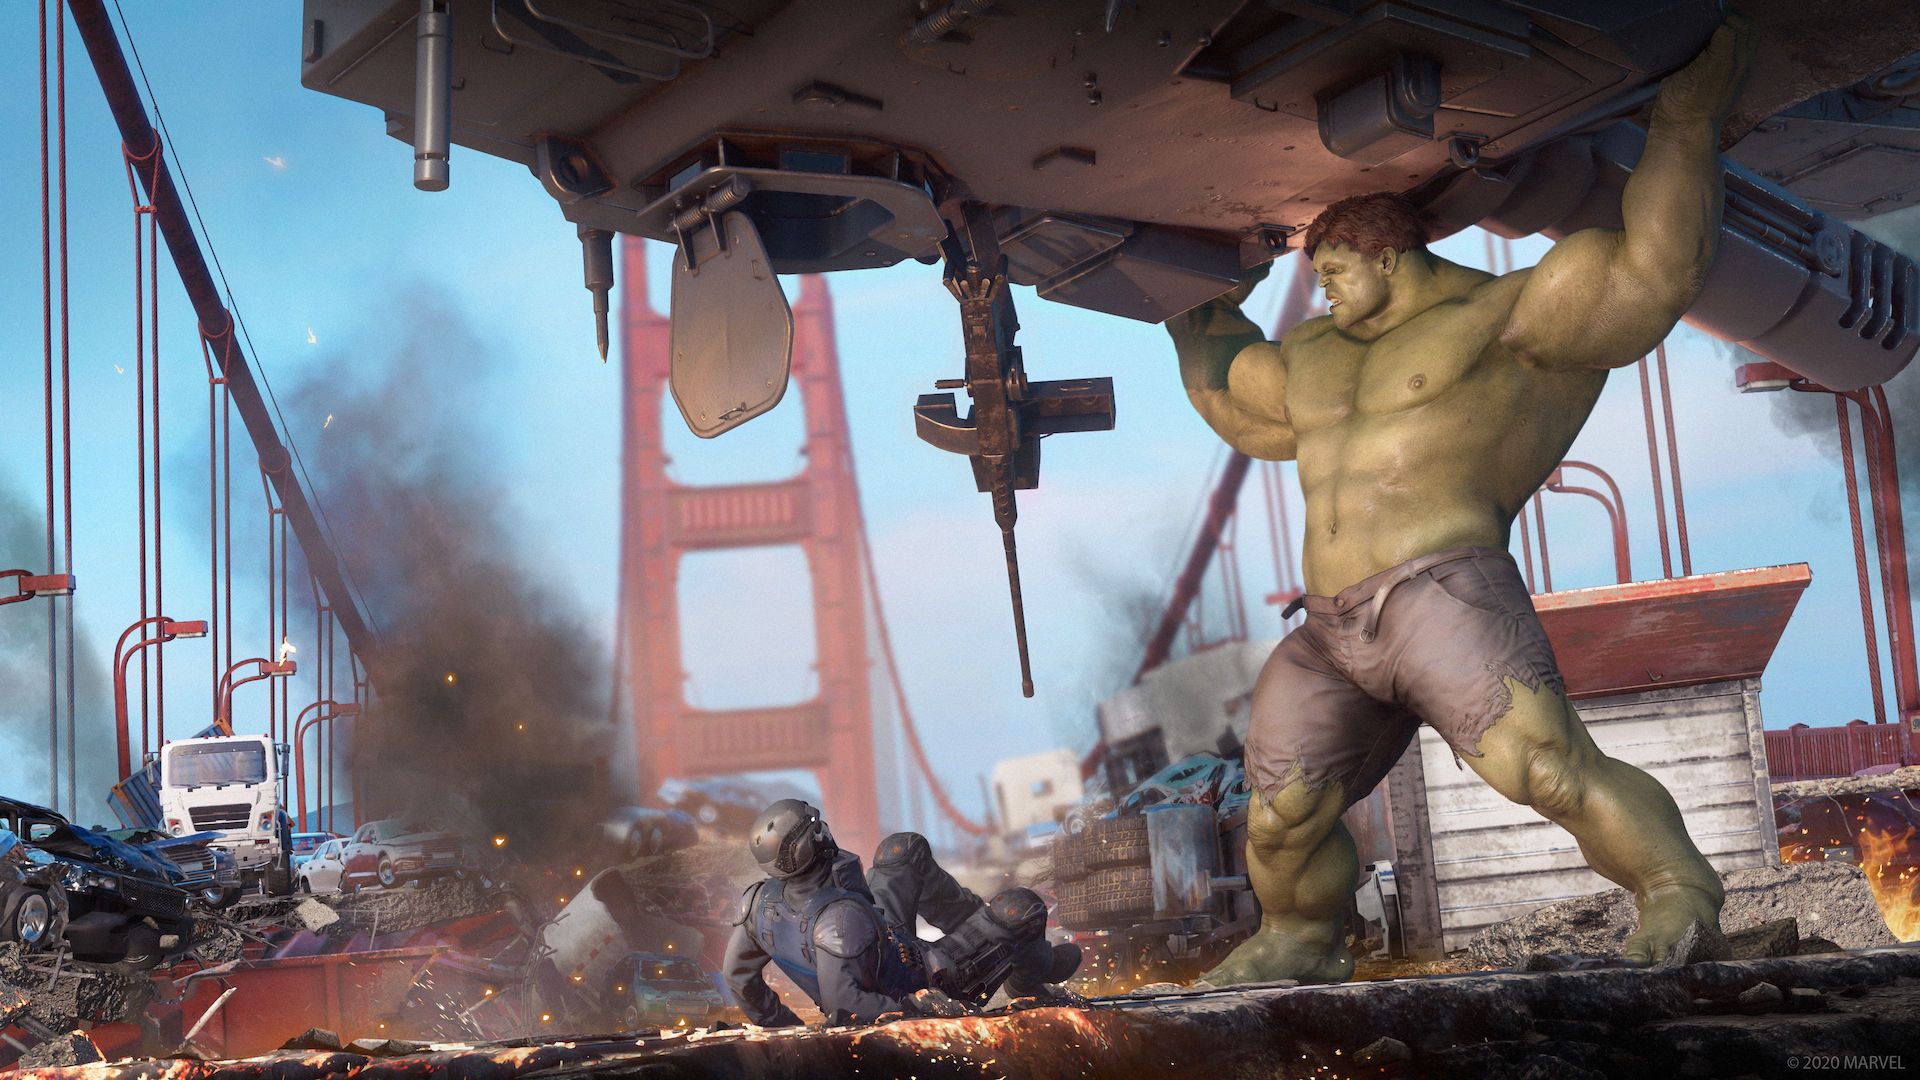 Marvel’s Avengers’ Hulk Wants To Teach You How To Smash In Humorous Video